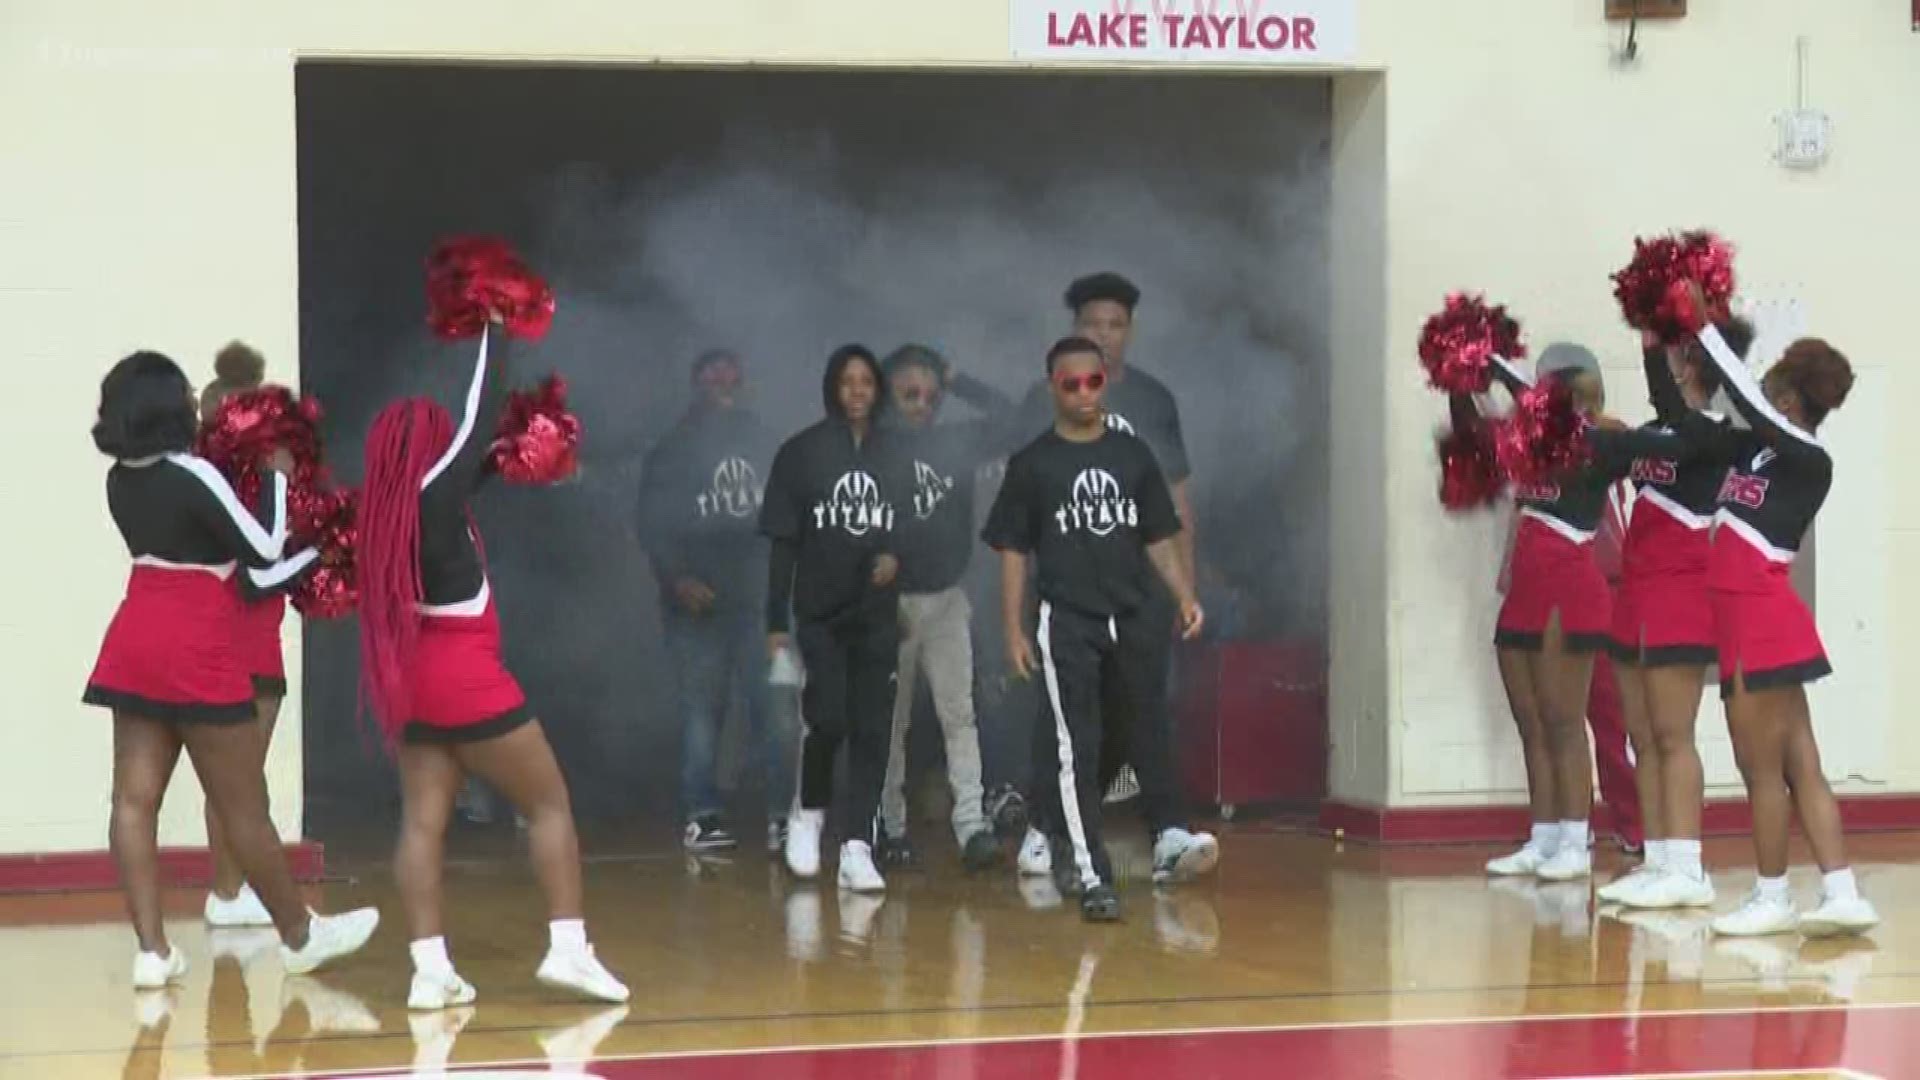 Lake Taylor celebrated their football team's Class 4 state championship